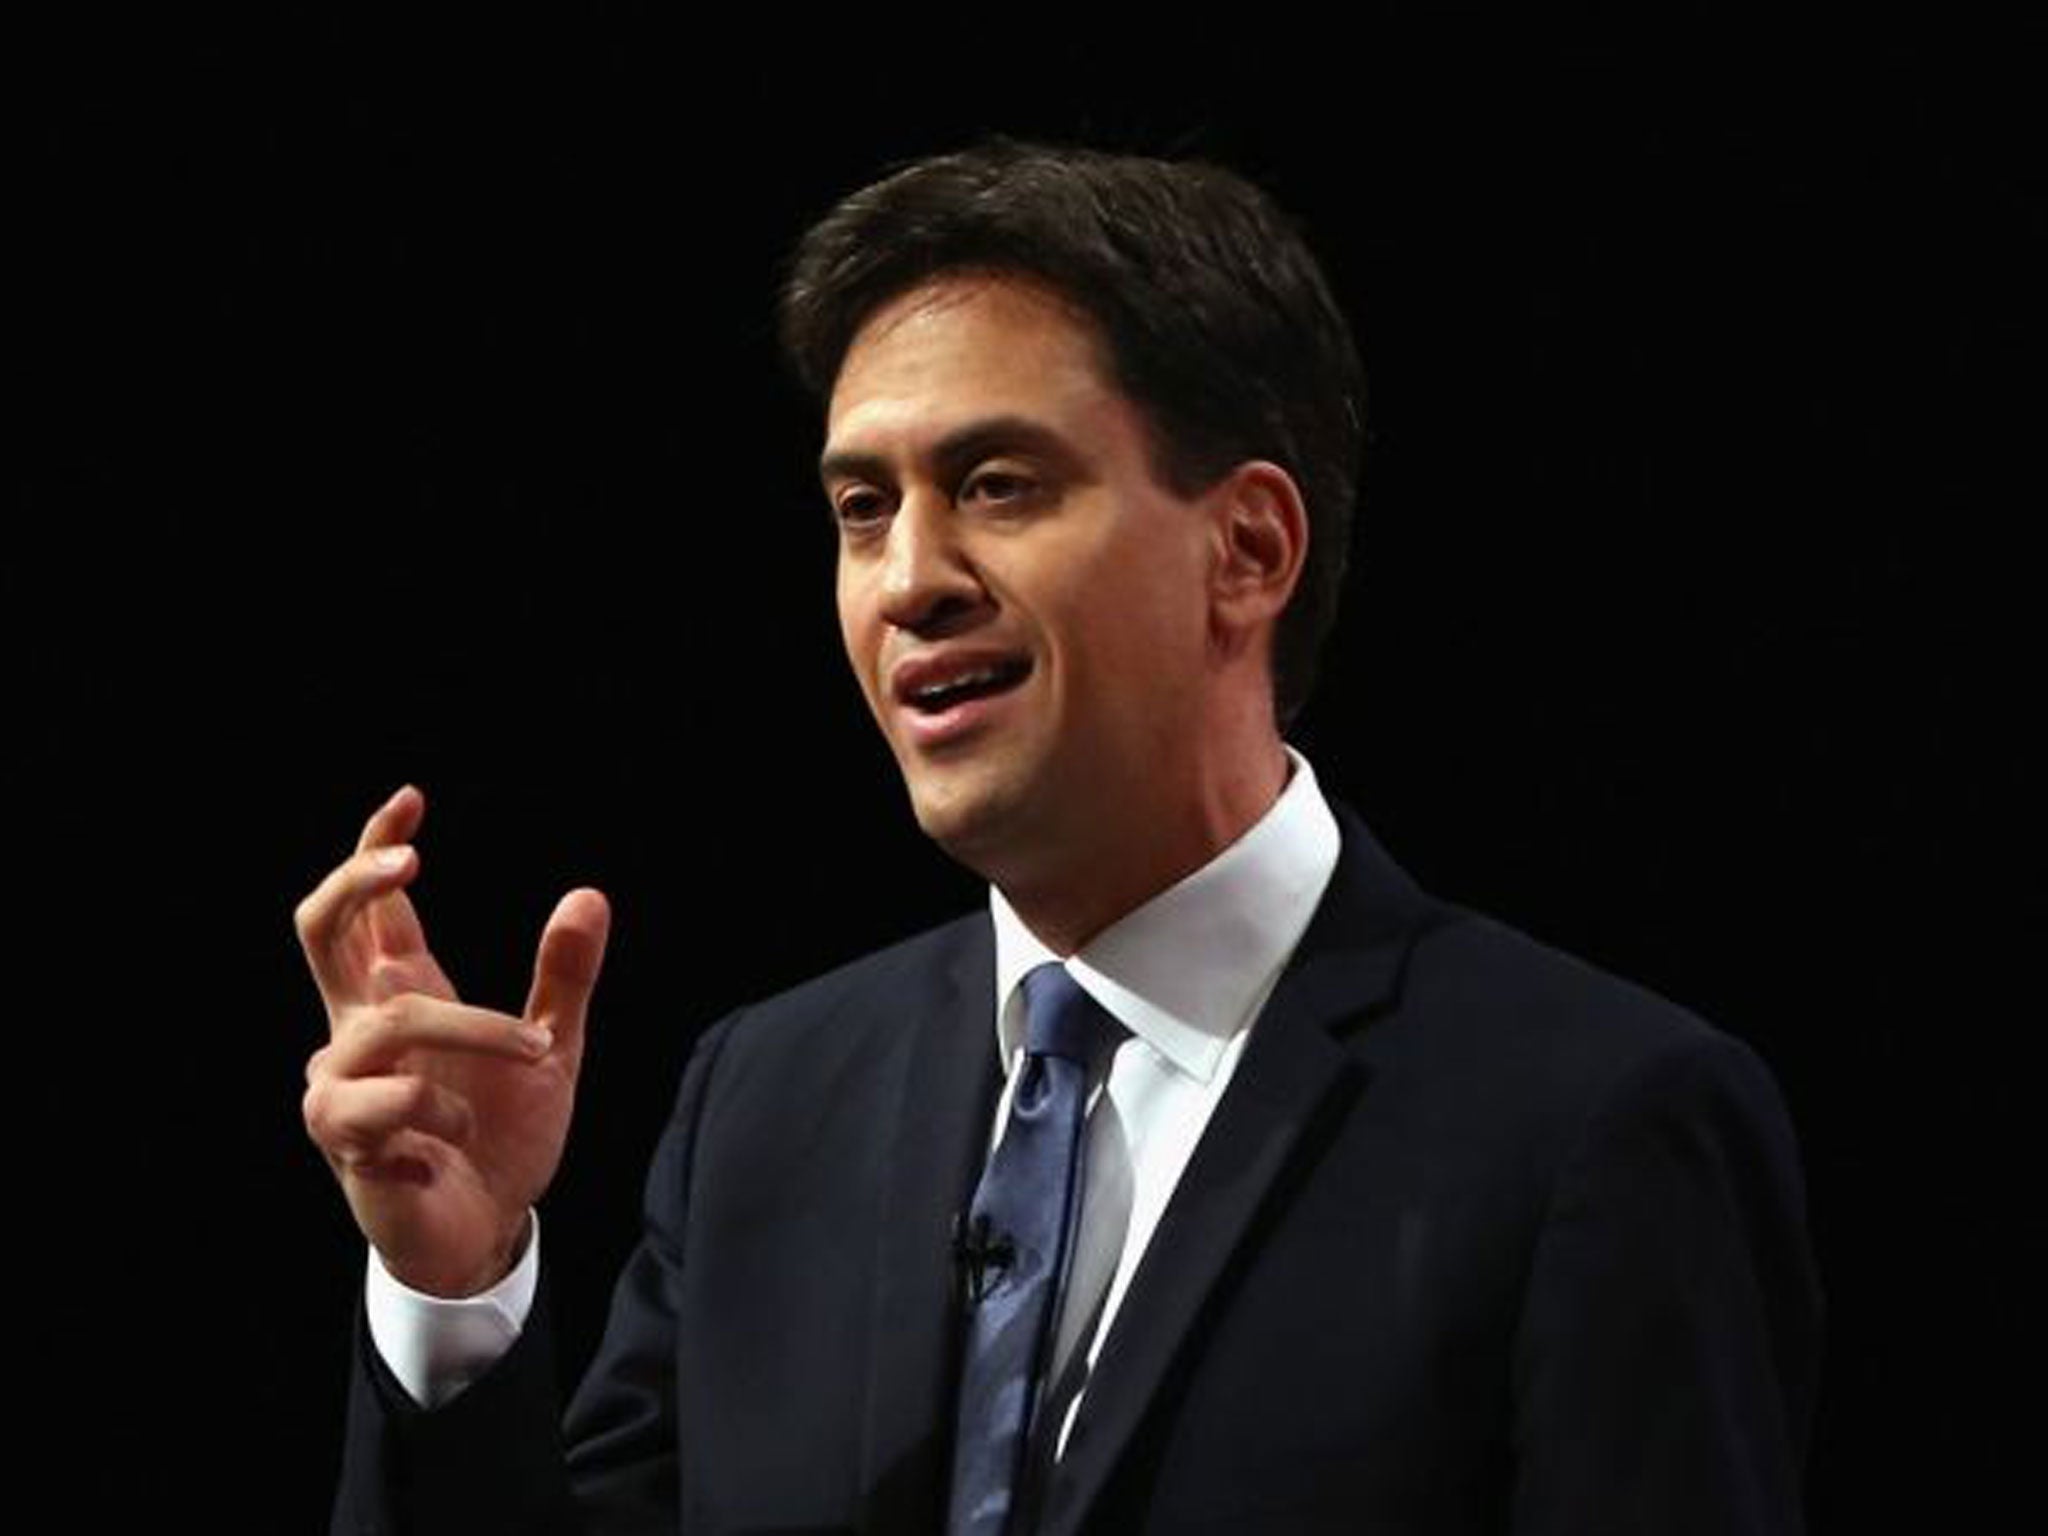 Ed Miliband plans to fund his planned NHS boost through mansion tax tobacco firm levies